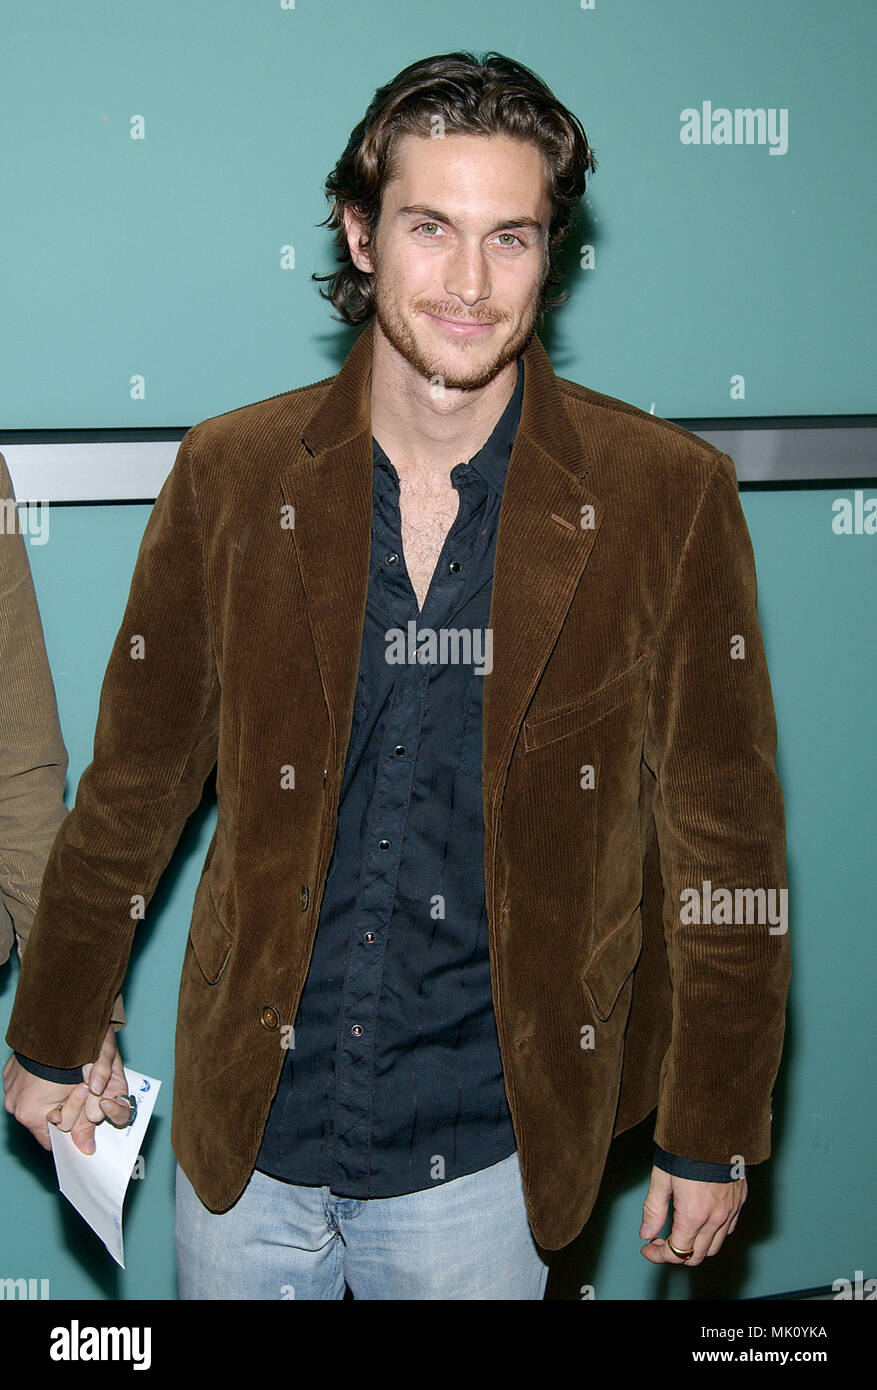 Oliver Hudson arriving at the premiere of " How To Lose A Guy In 10 Days "  at the Cinerama Dome in Los Angeles. January 27, 2003. -  HudsonOliver16.jpgHudsonOliver16 Event in Hollywood